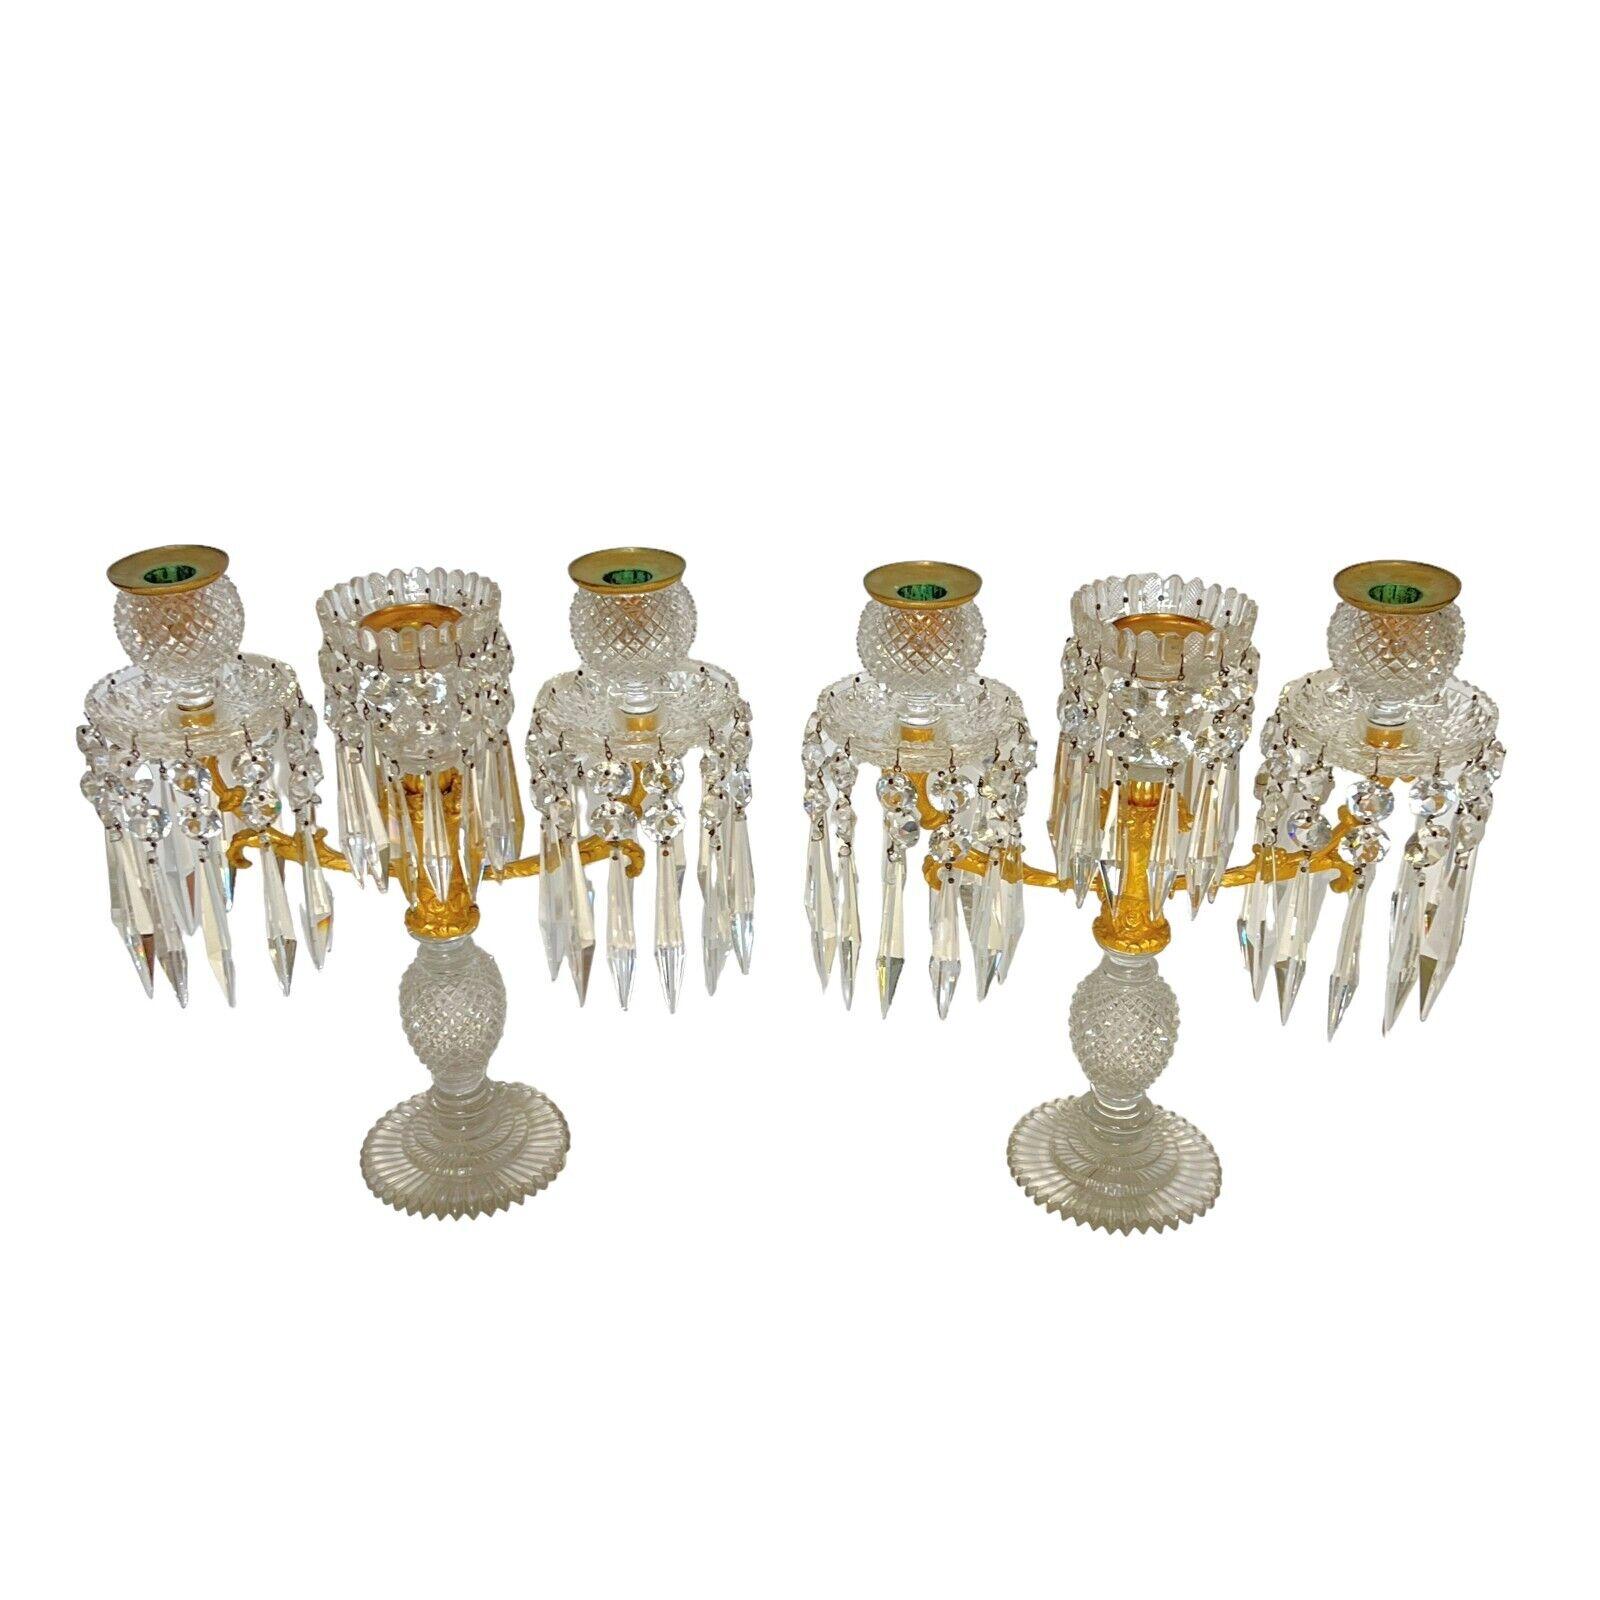 19th Century A Pair Of English Regency Ormolu and Cut Glass Candelabra, attributed to Blades For Sale